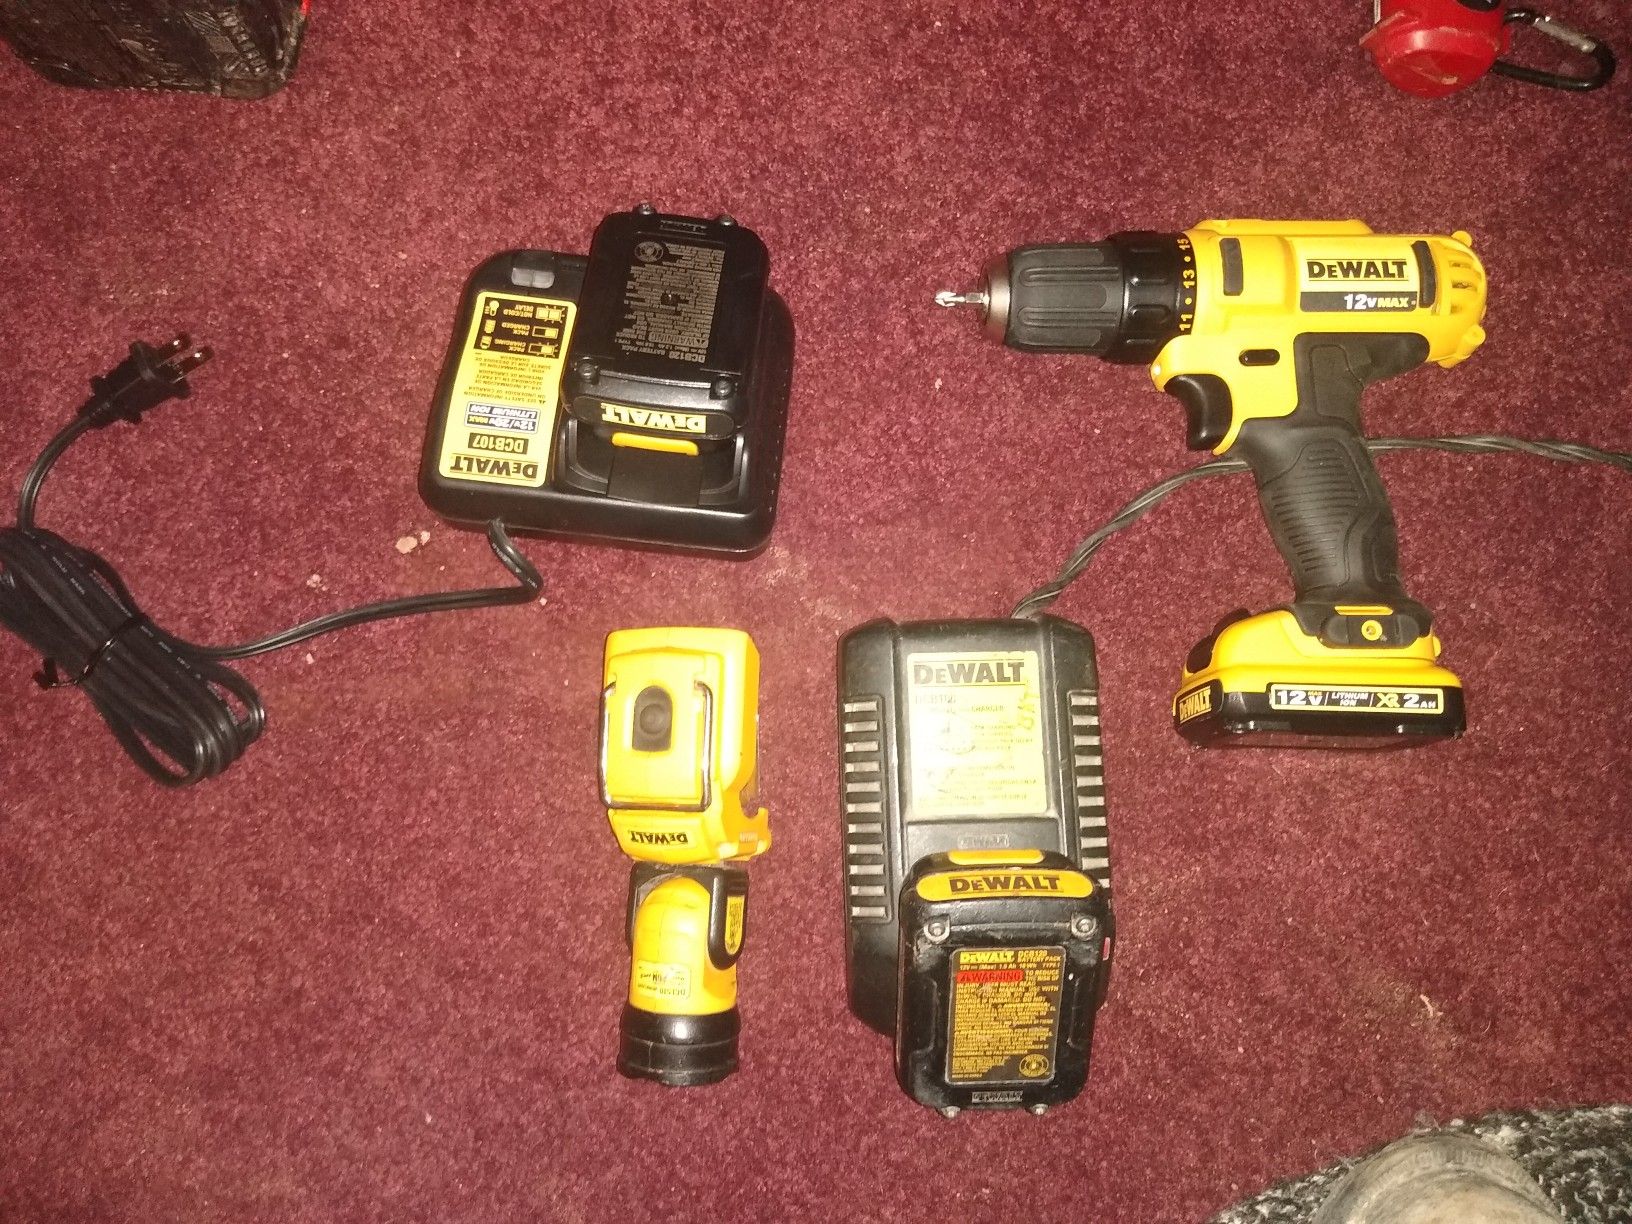 Brand new 12 volt XR 2 drill 2 batteries and charger comes with the used flashlight one battery and charger